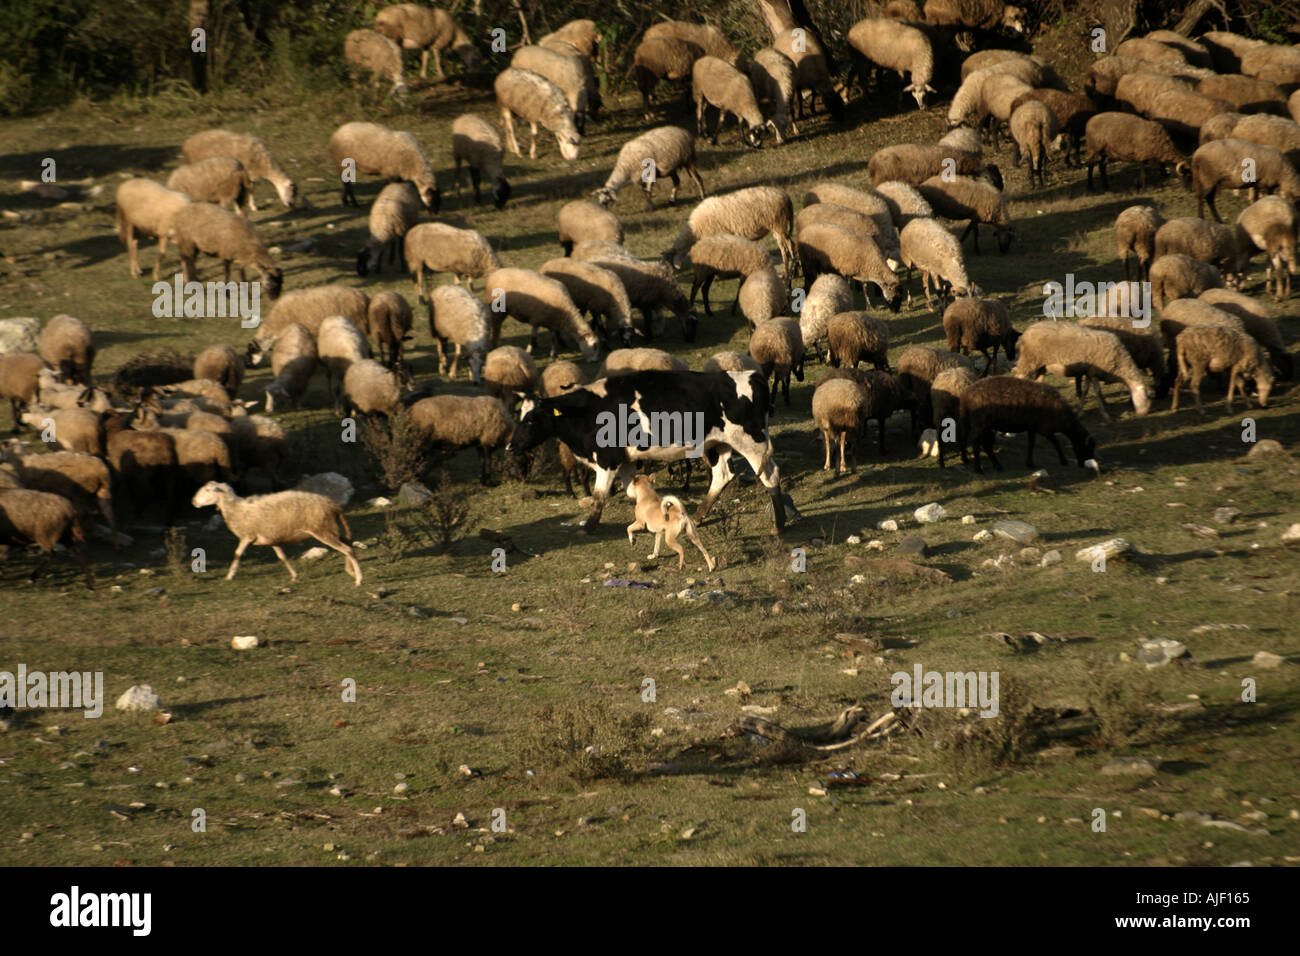 Sheeper dogs try seperate cows from sheeps Lake Kerkini Greece Stock Photo